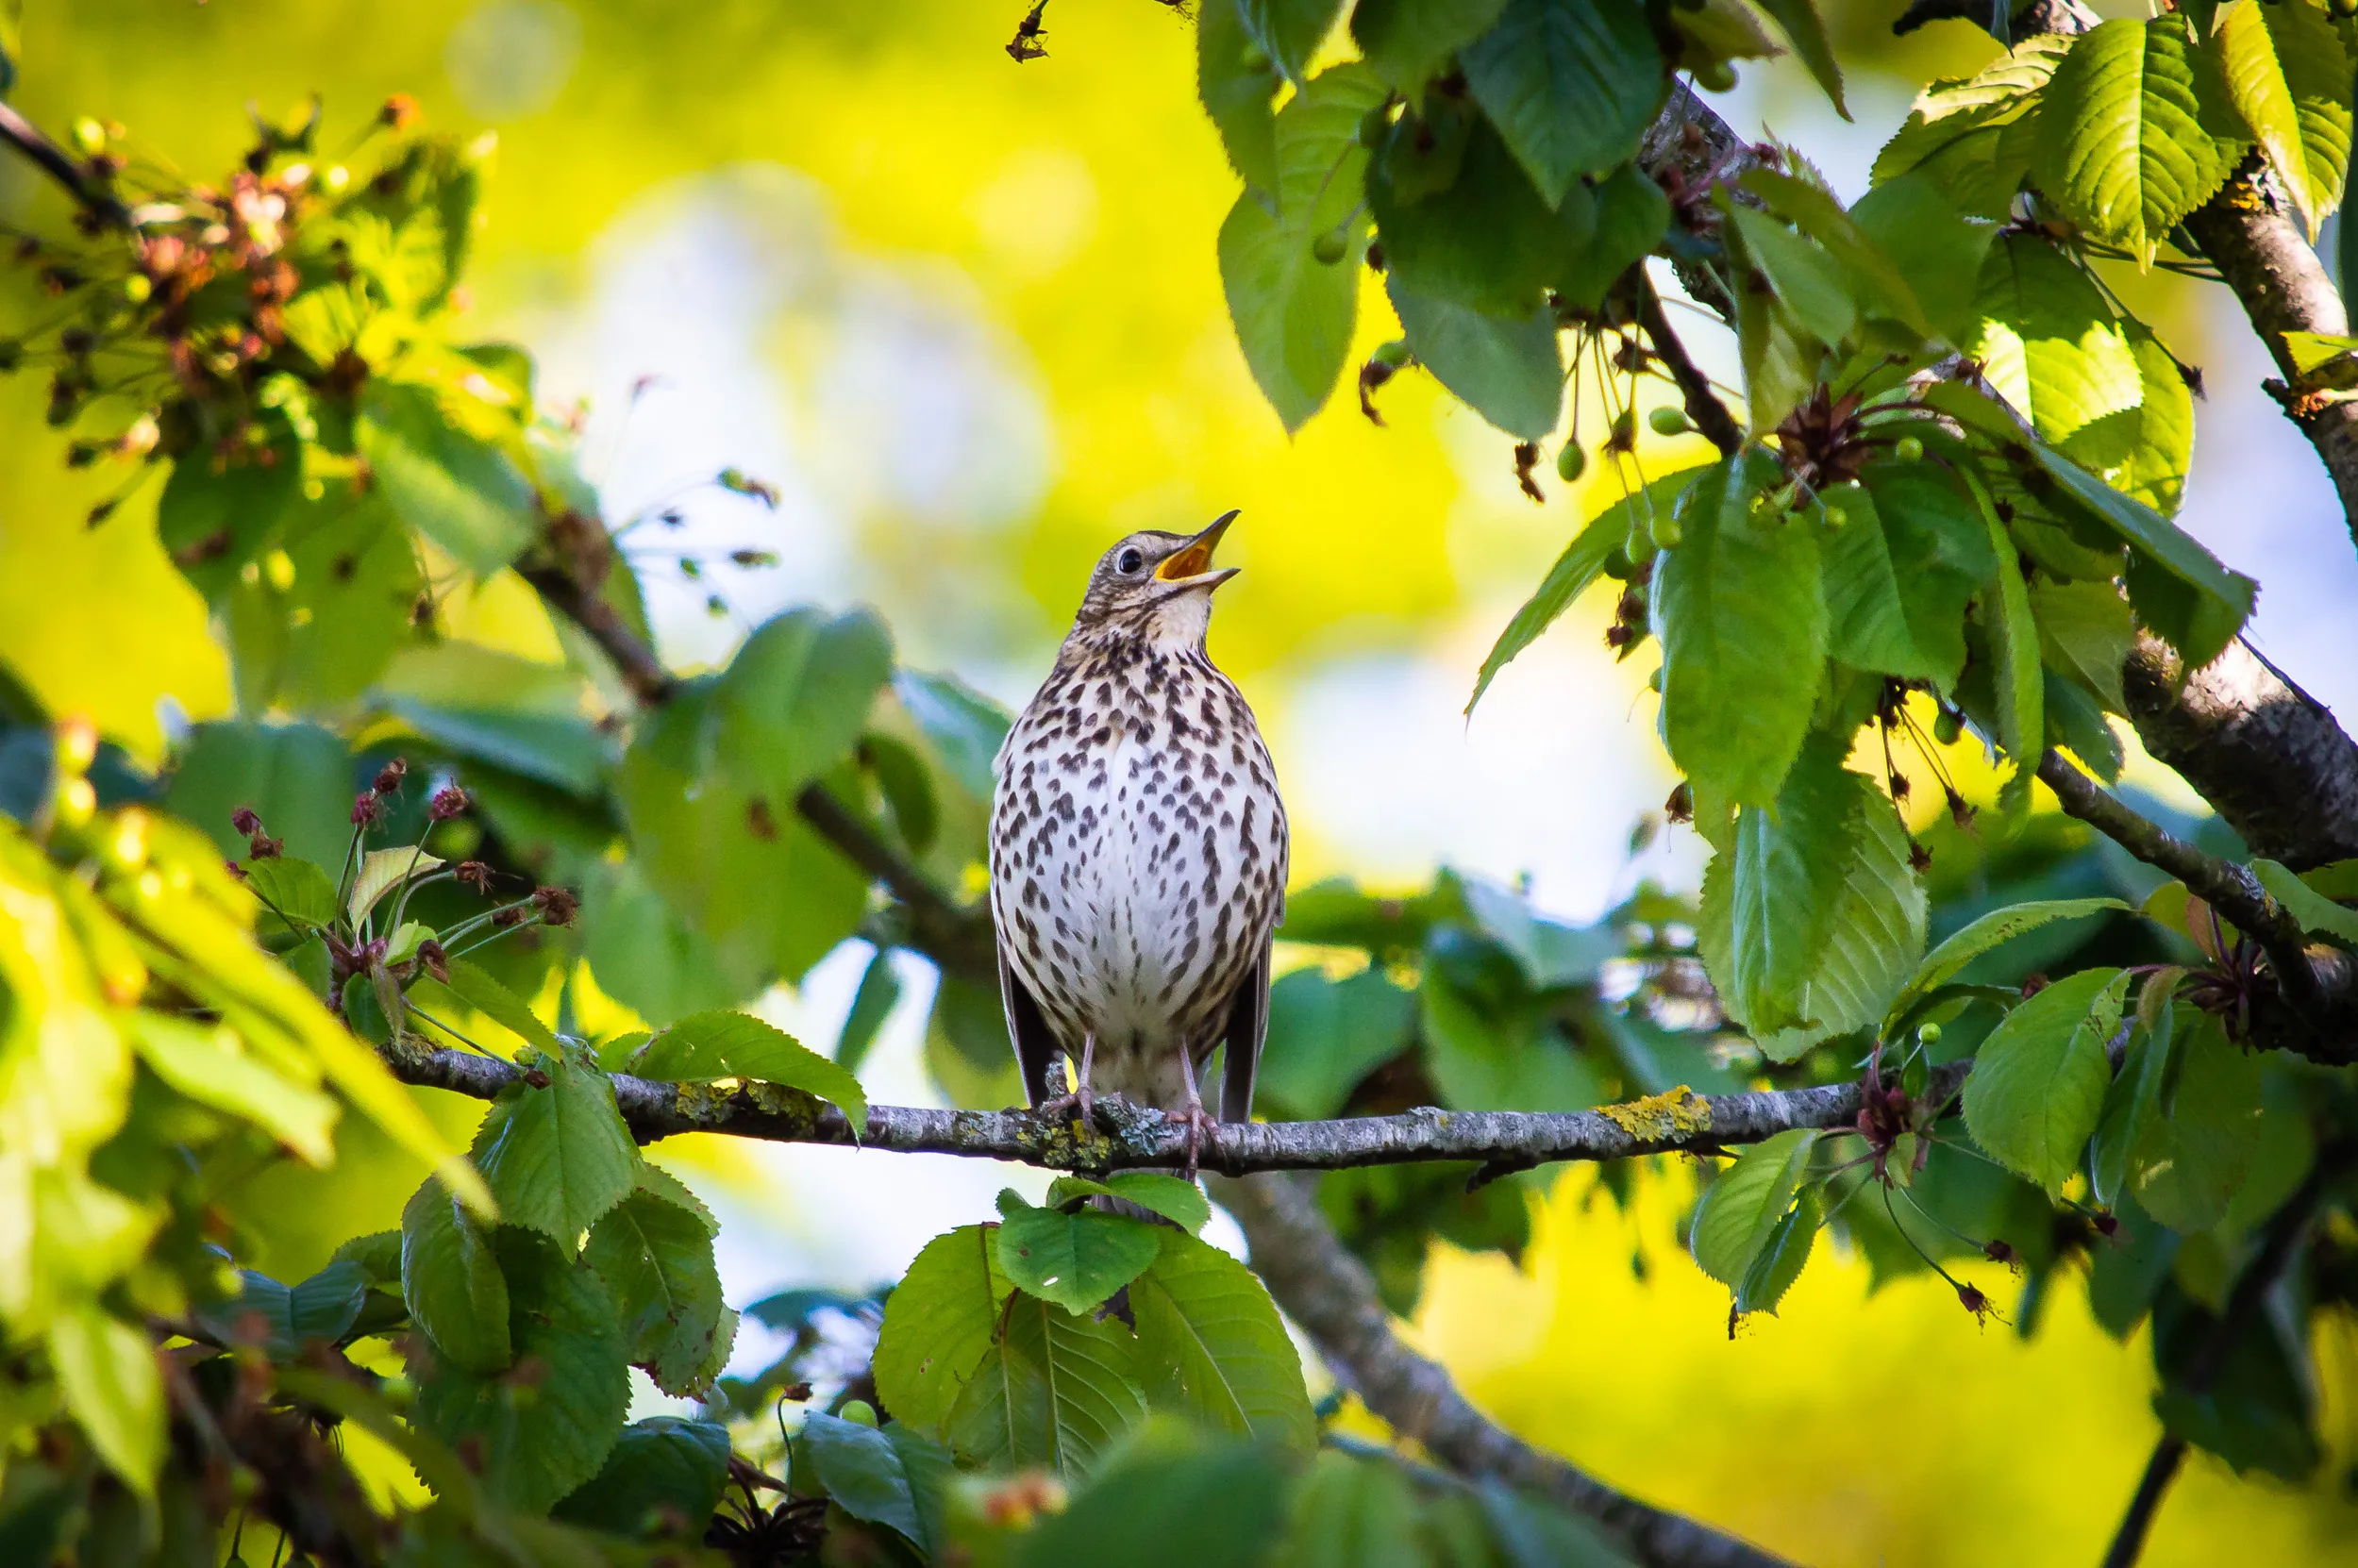 A Song Thrush perched in a branch between colourful leaves singing. 